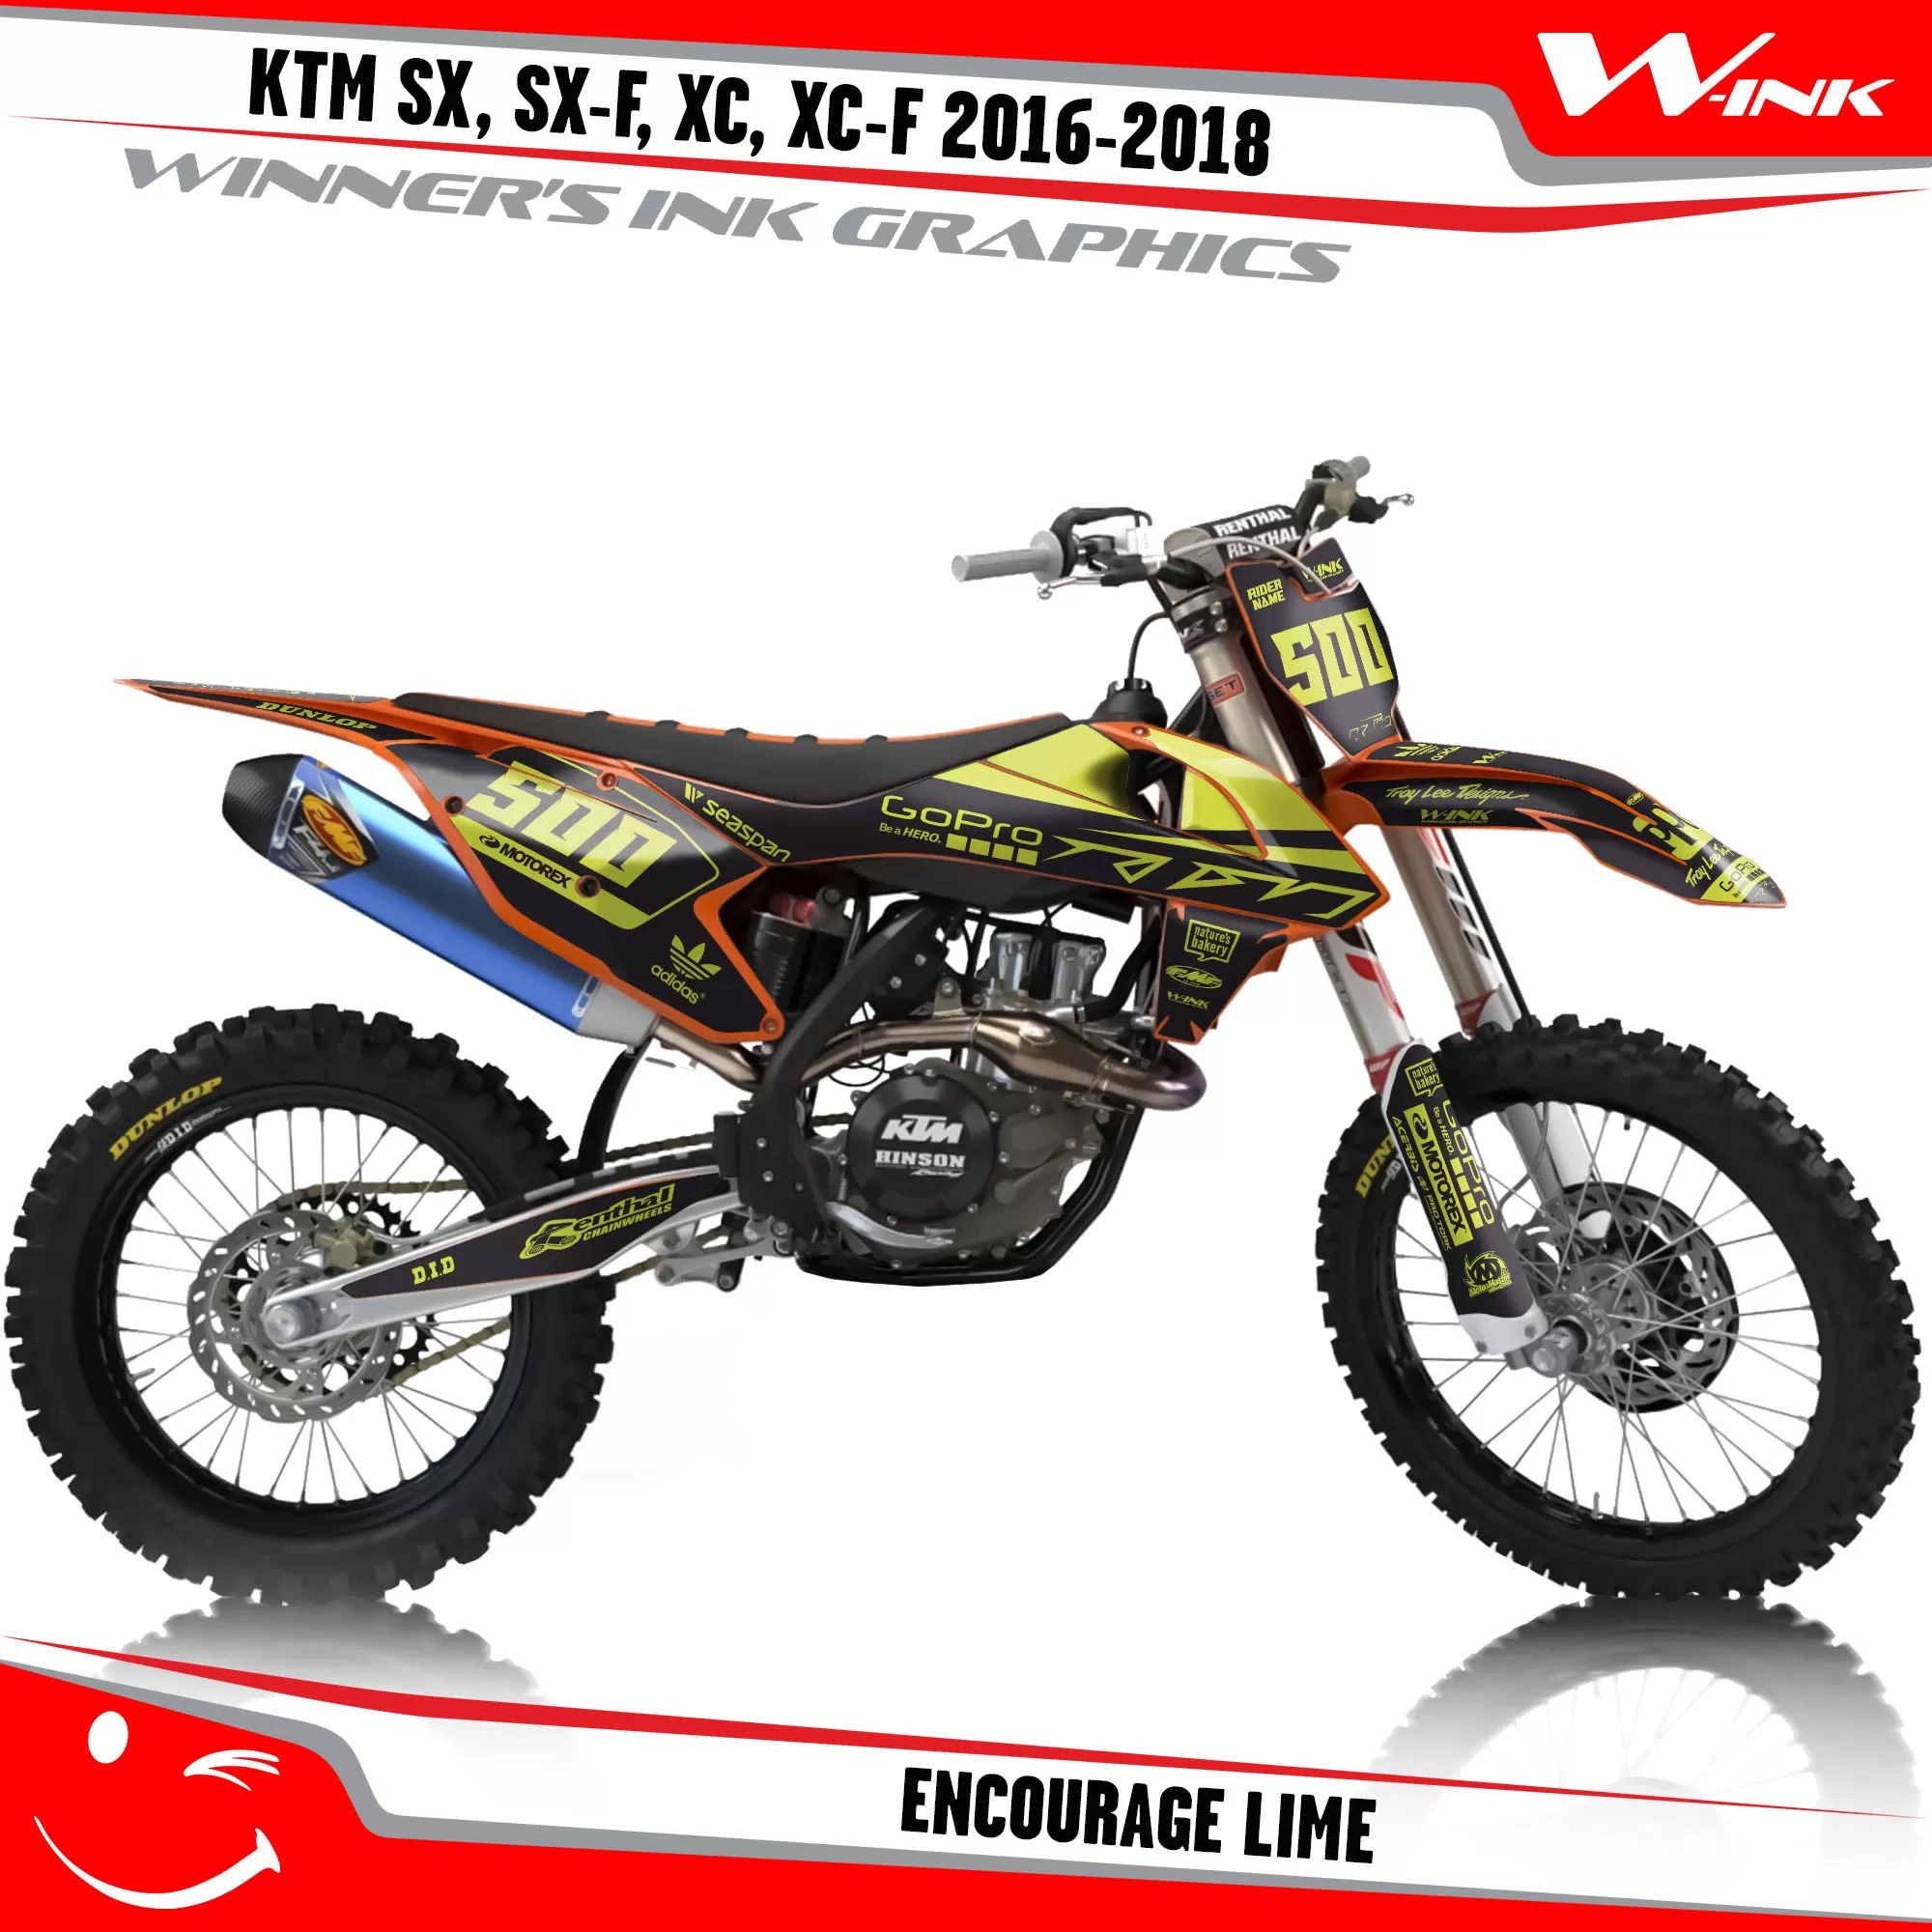 decals For KTM SX, SX-F, XC, XC-F 2016-2018 Encourage Lime